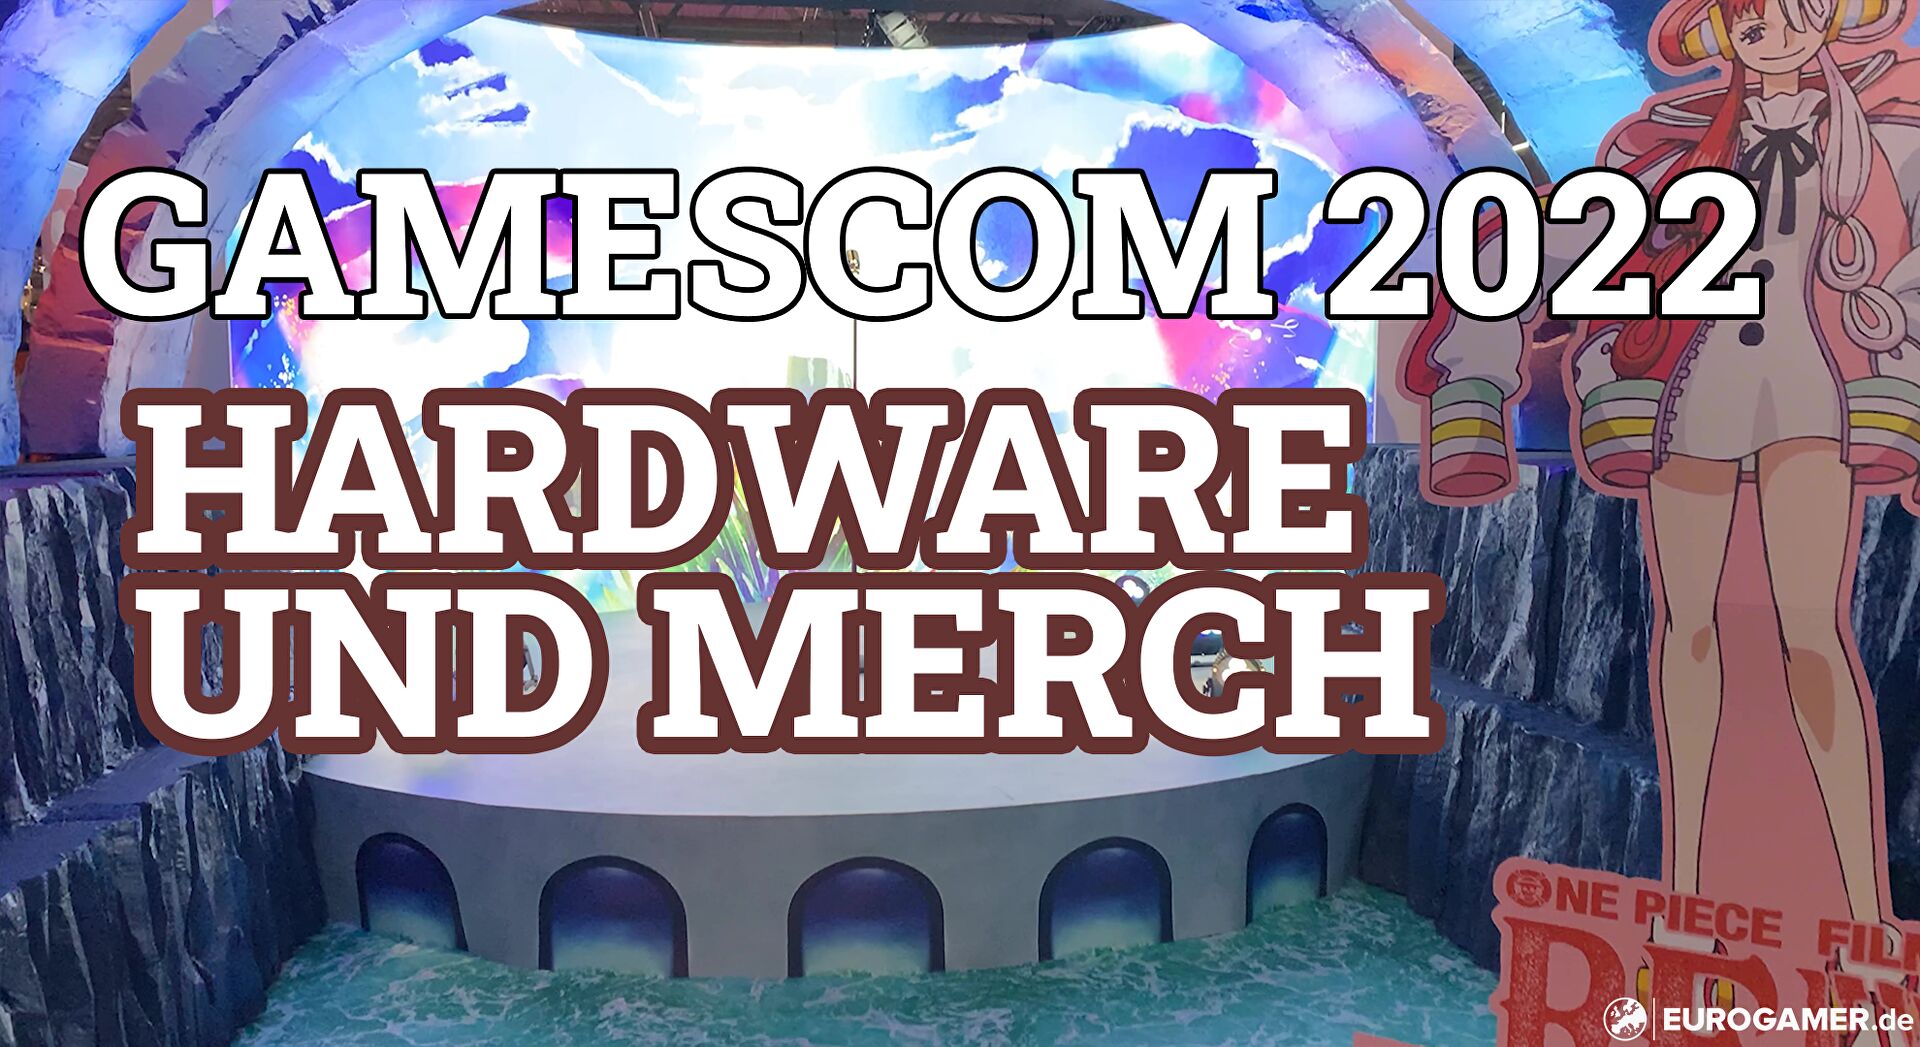 gamescom 2022: The best in terms of hardware and merchandise